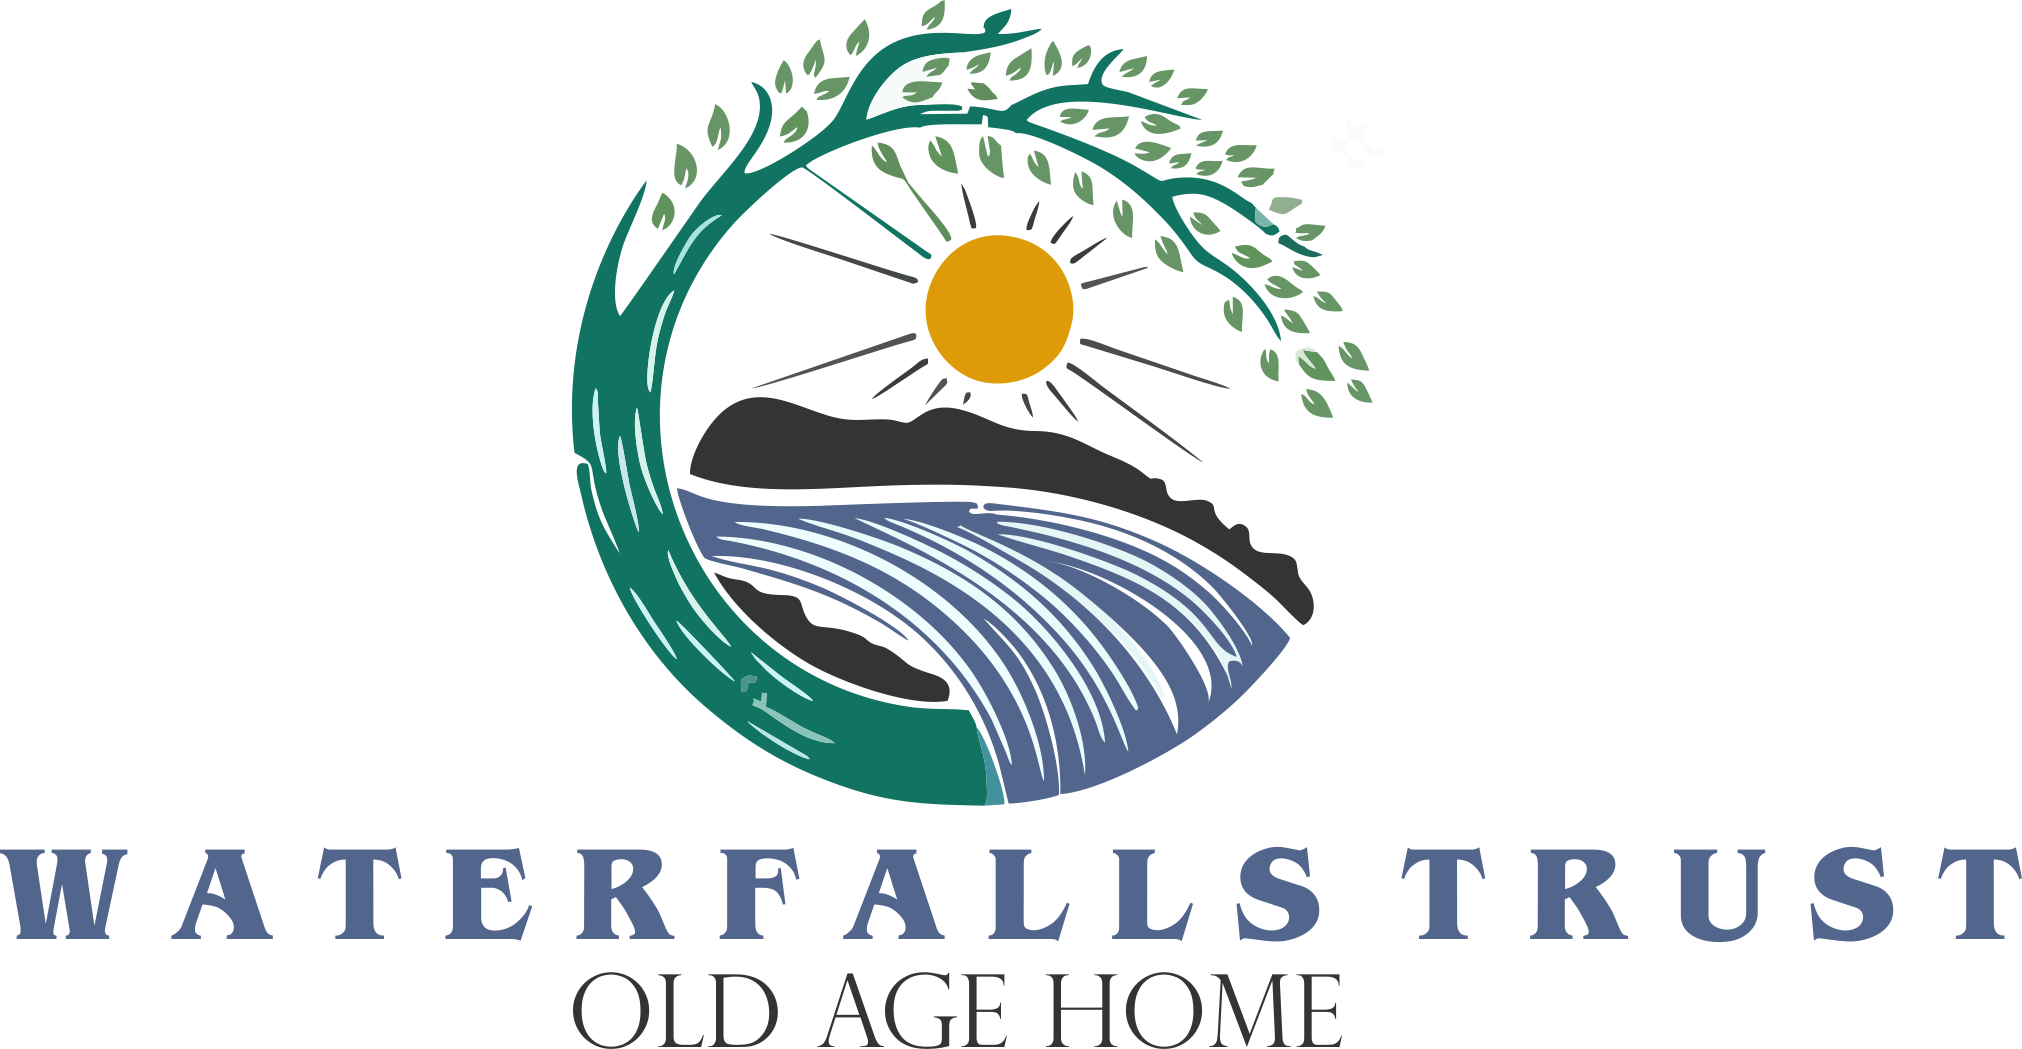 Waterfalls Trust Old Age Home